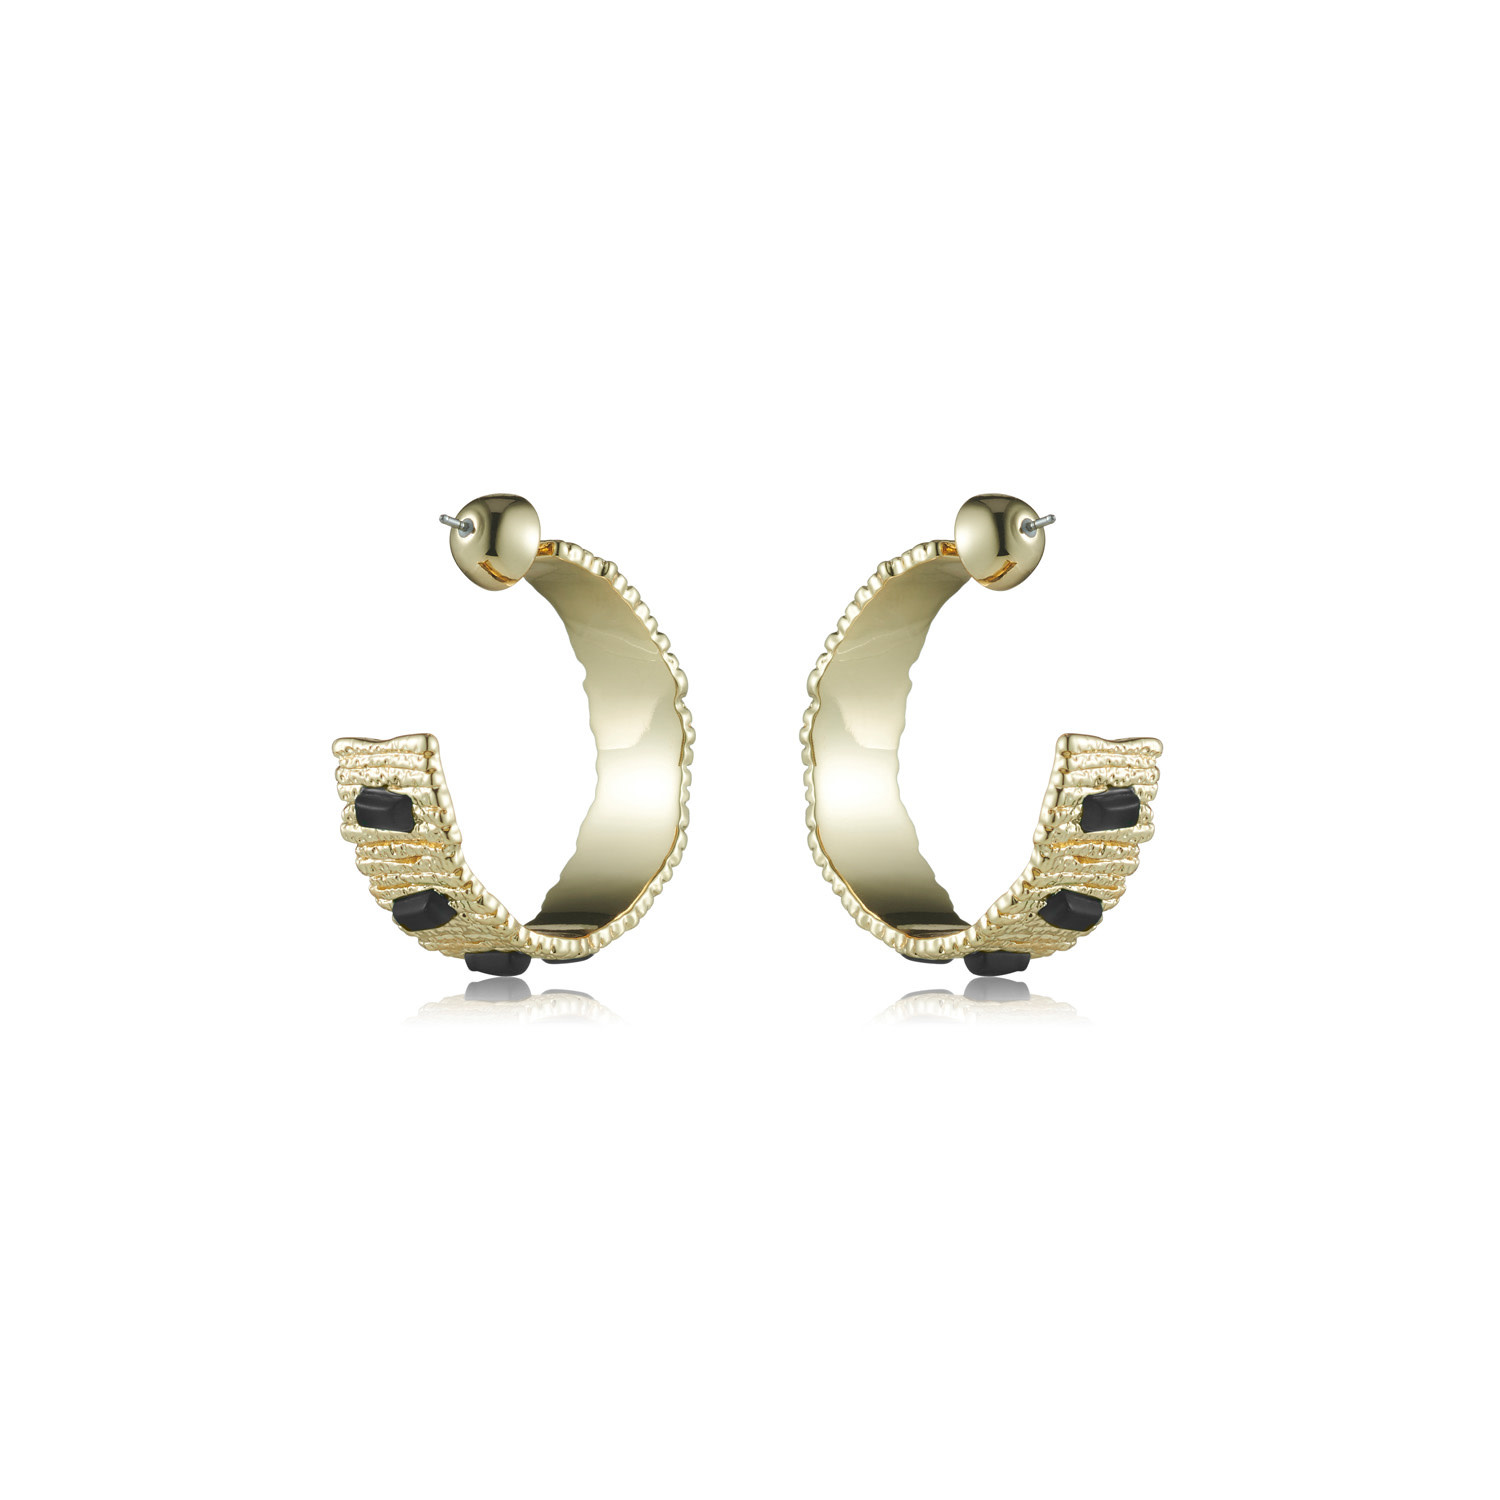 Crescent Hoop Earrings - Brut Baum Collection -14ct Gold Plated Hoop Earrings with Black Agate 3.5cm  - Sarina Suriano for BECKER MINTY-2